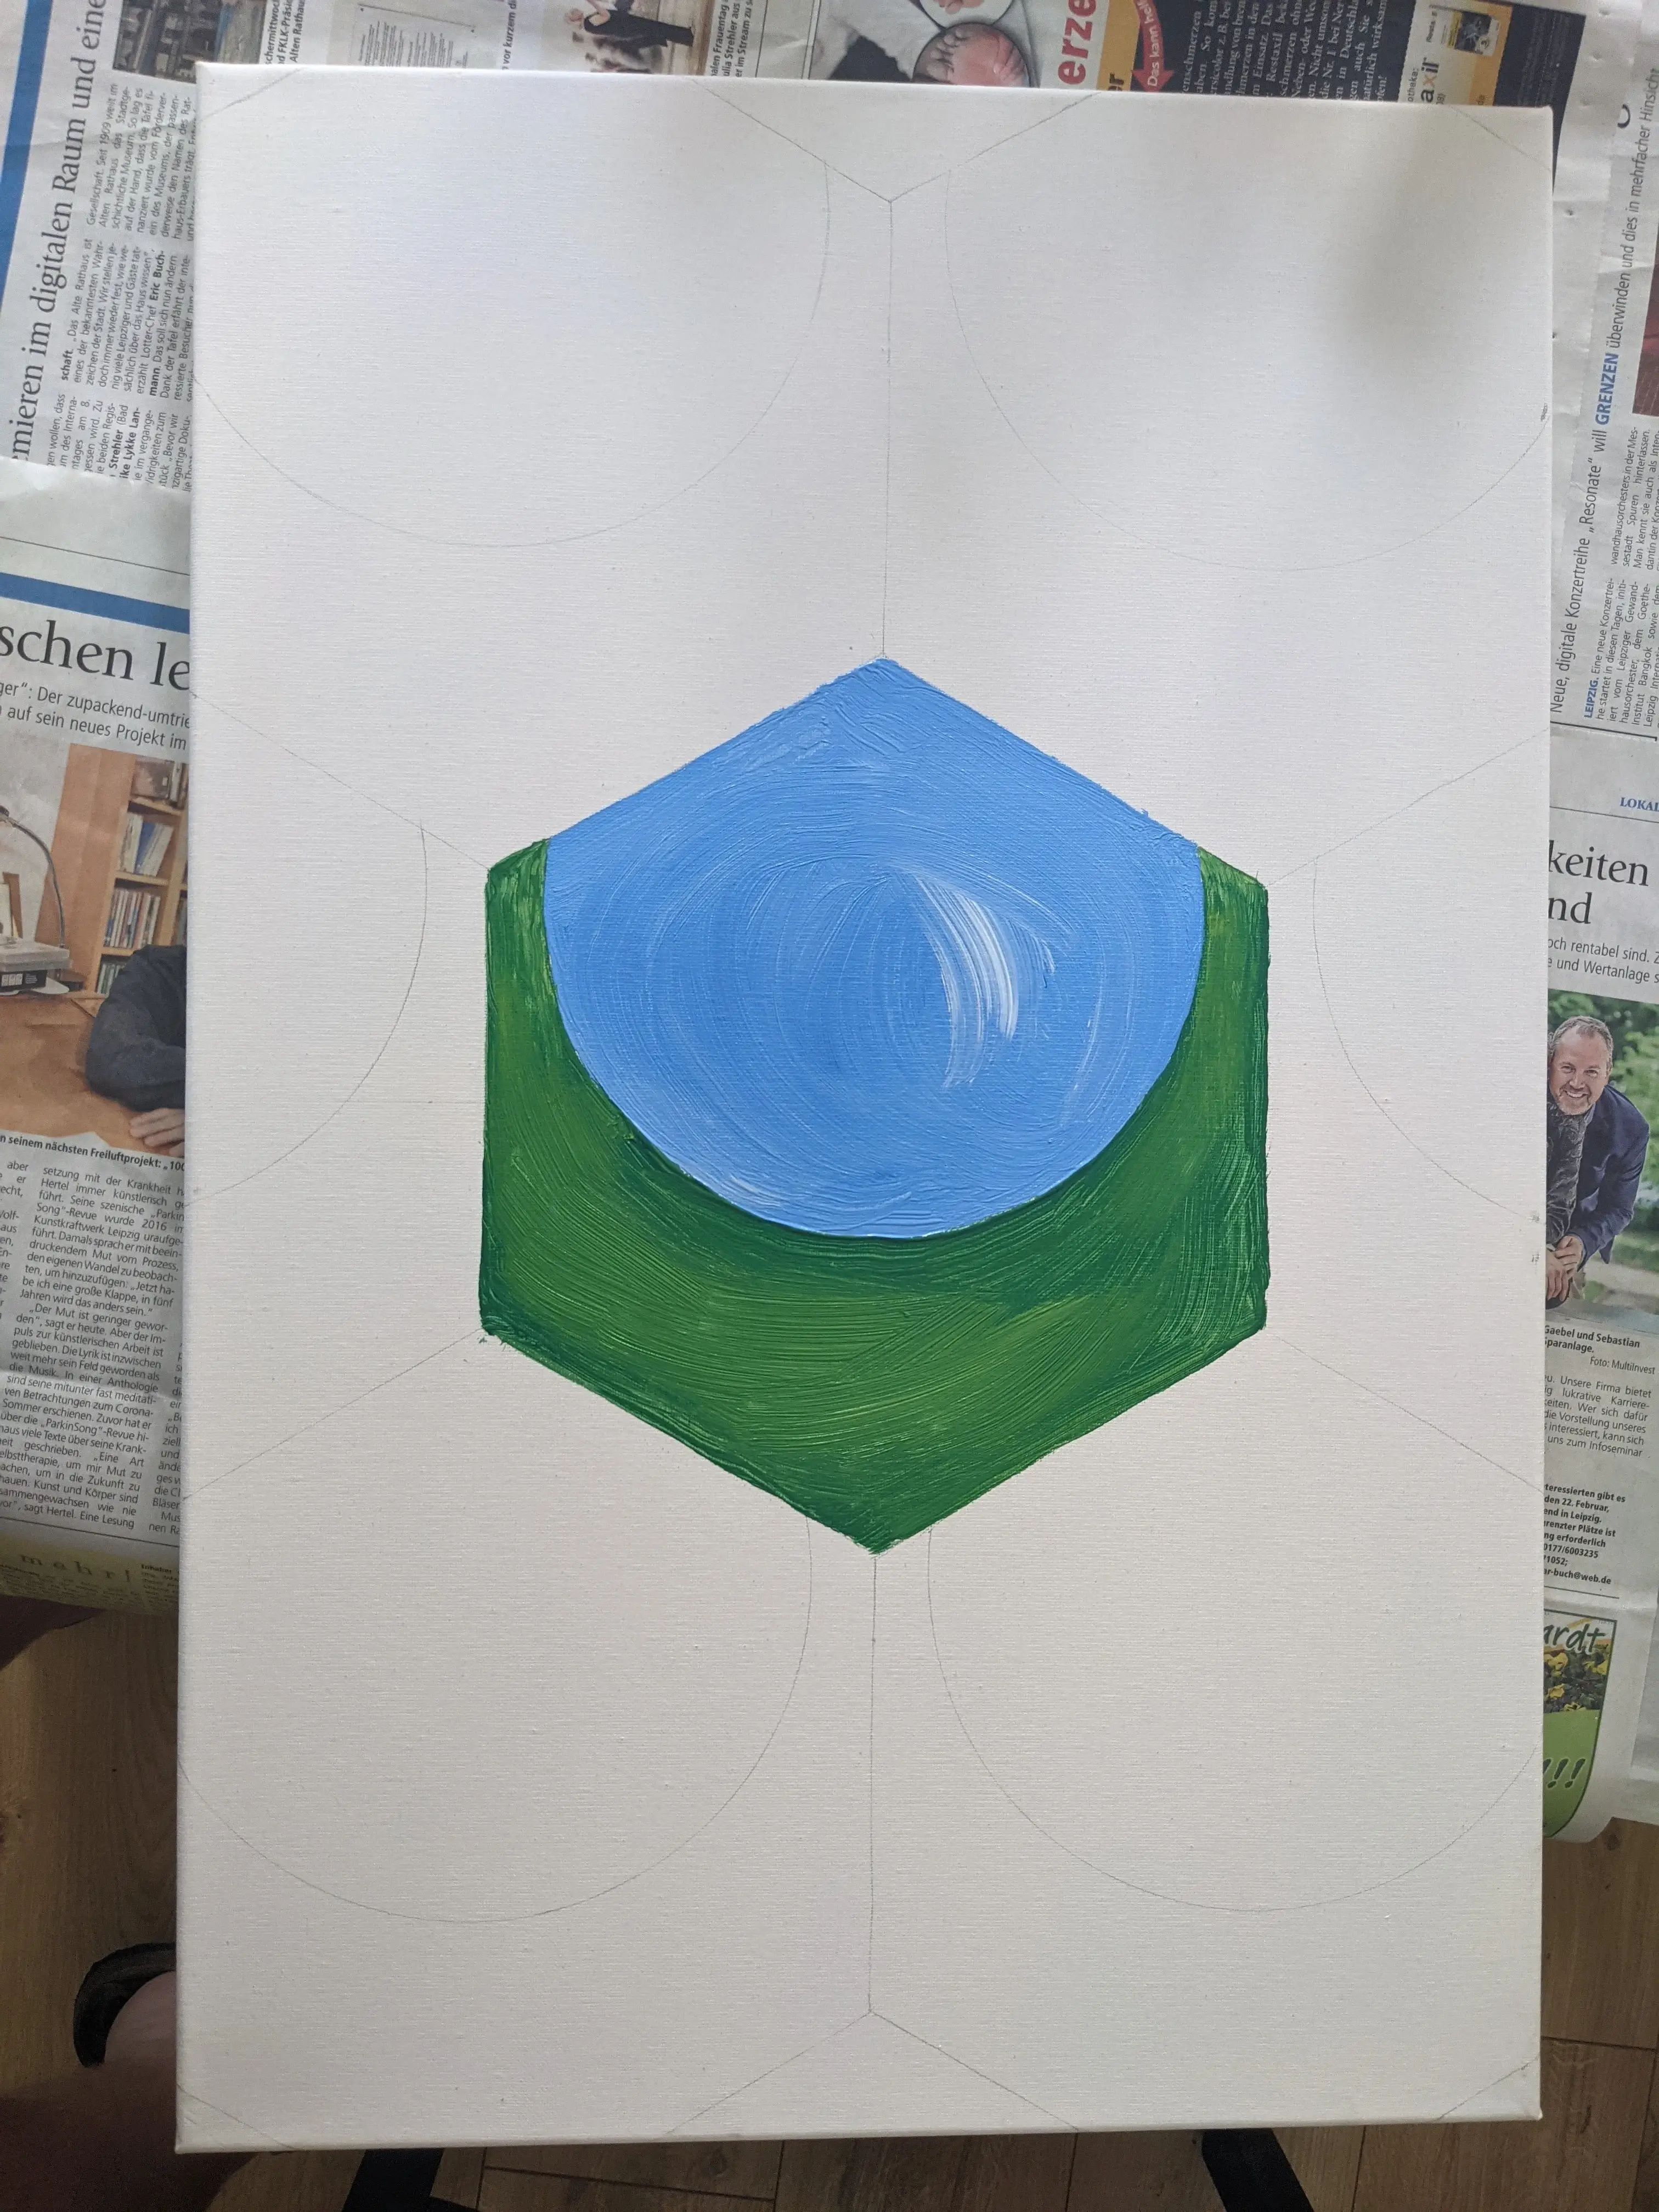 Hexagon pattern sketched out and started to paint the center piece